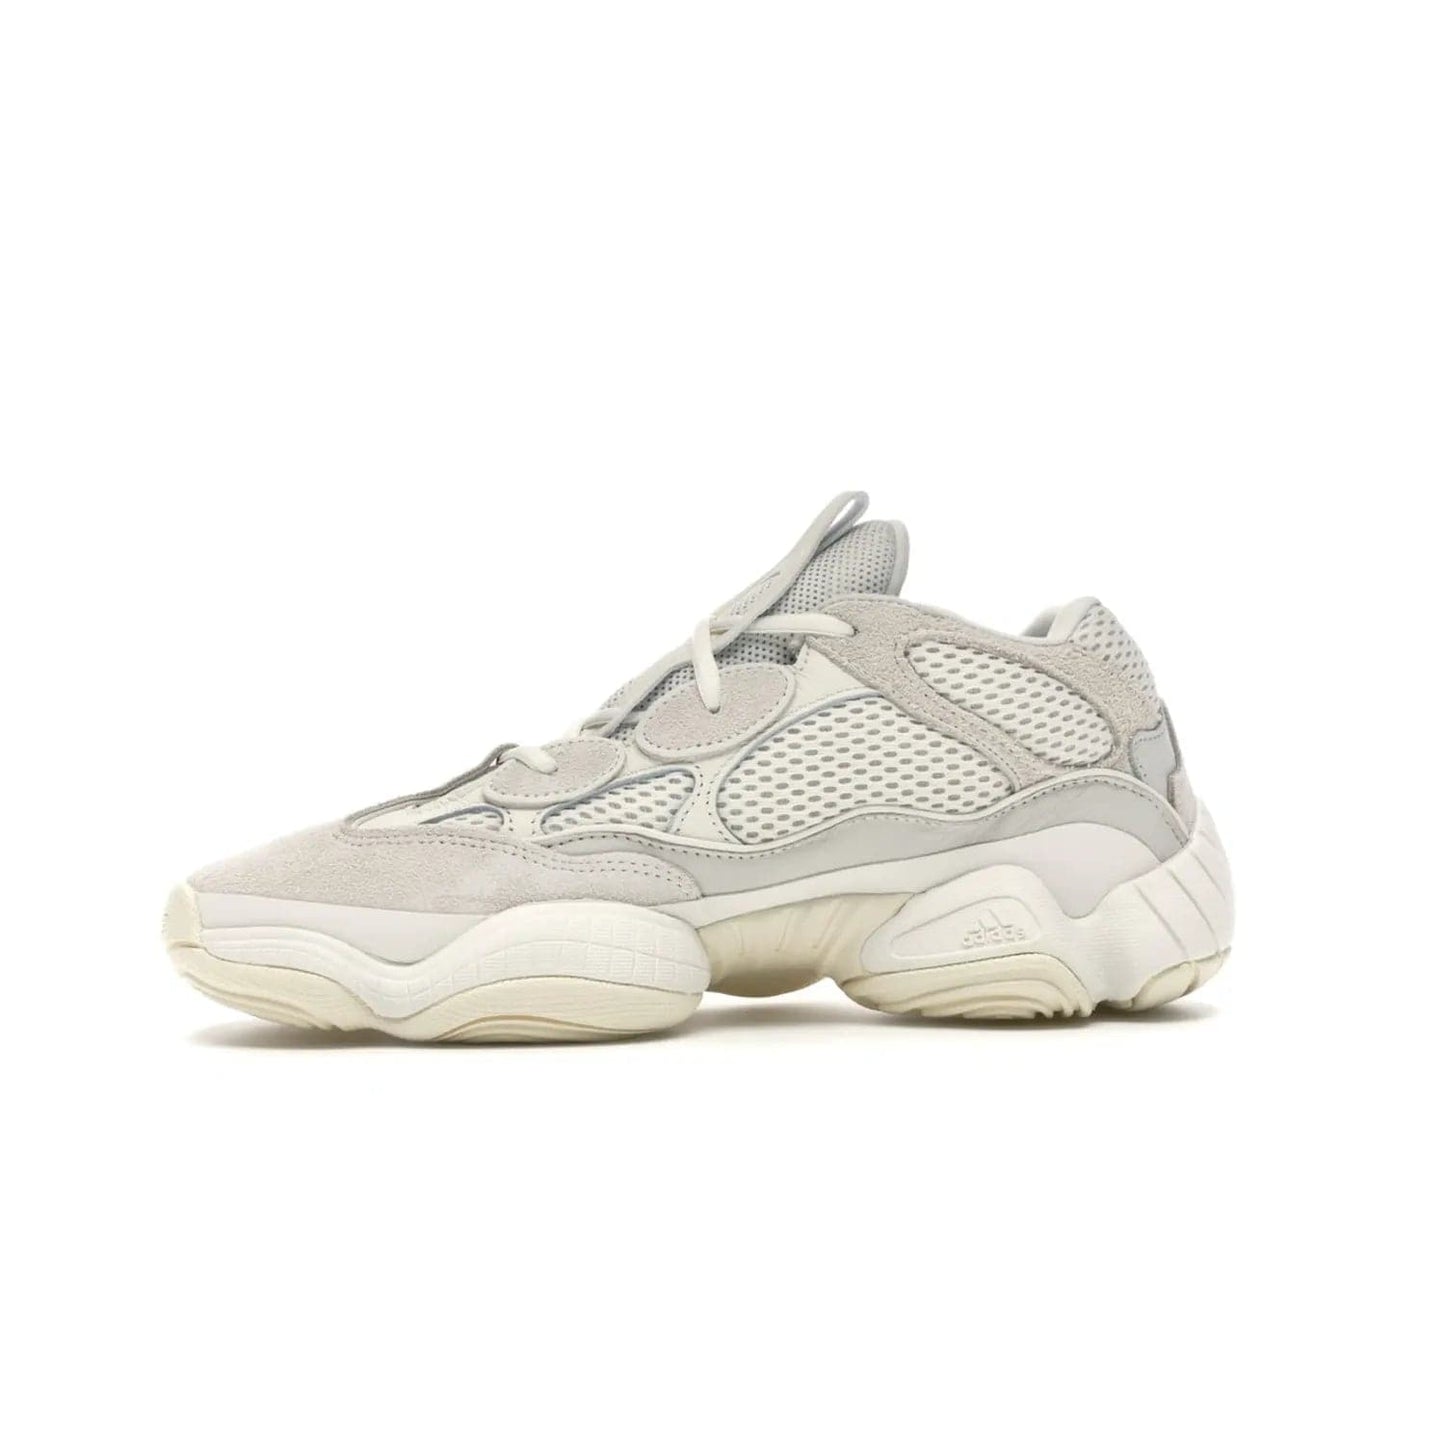 adidas Yeezy 500 Bone White - Image 18 - Only at www.BallersClubKickz.com - Classic look perfect for any sneaker collection. The adidas Yeezy 500 "Bone White" blends a white mesh upper with suede overlays & a chunky midsole inspired by the Adidas KB3. Complimented by a tonal-cream outsole, this timeless style is a must-have.